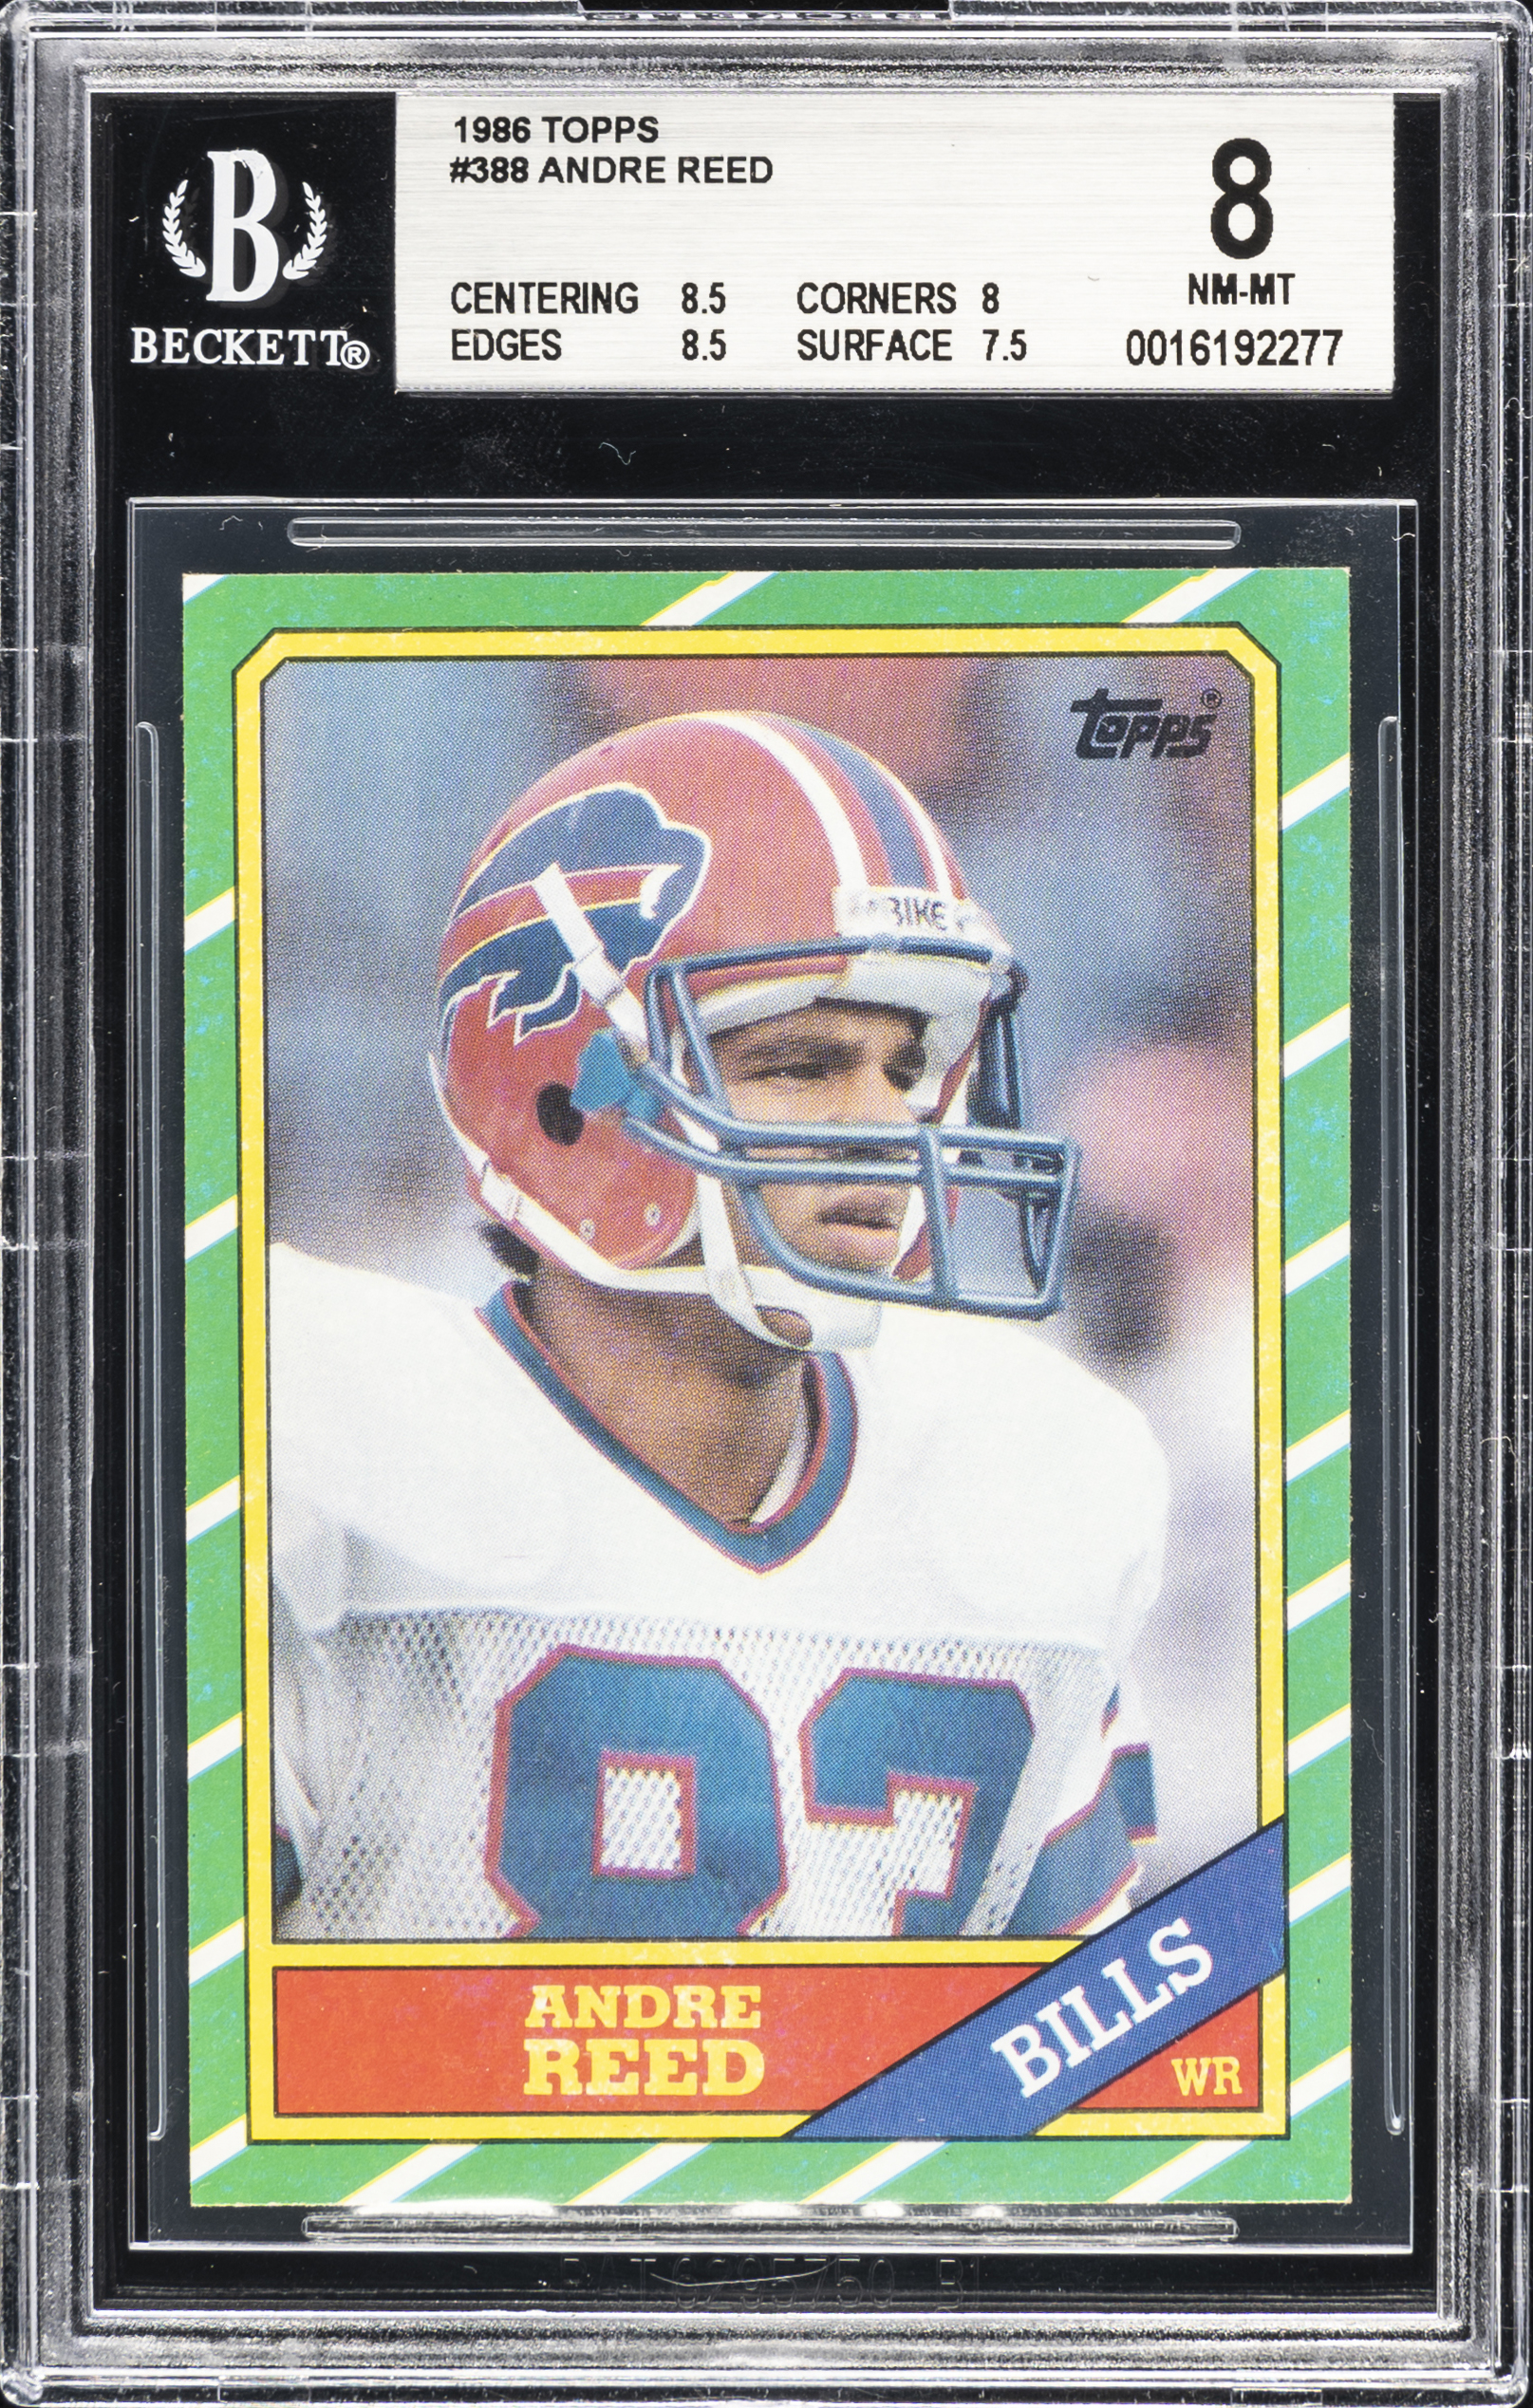 1986 Topps #388 Andre Reed – BGS NM-MT 8